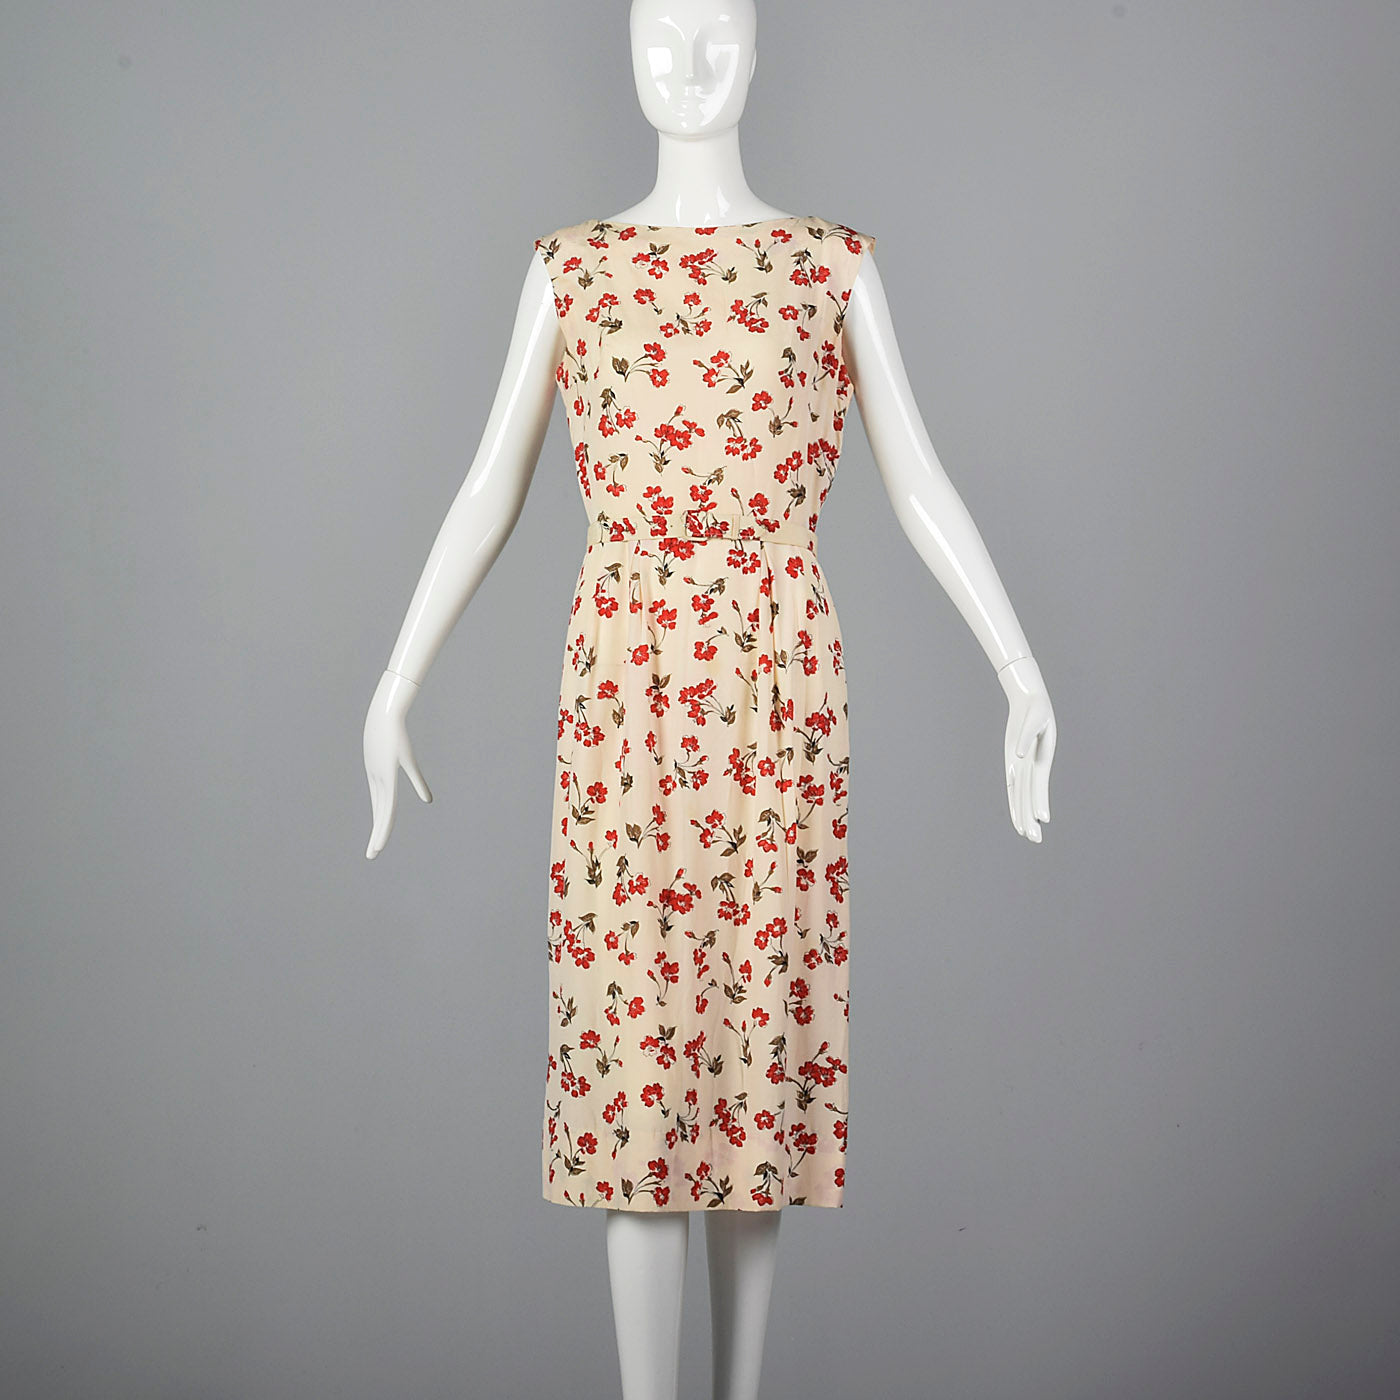 1960s Floral Print Pencil Dress with Matching Jacket